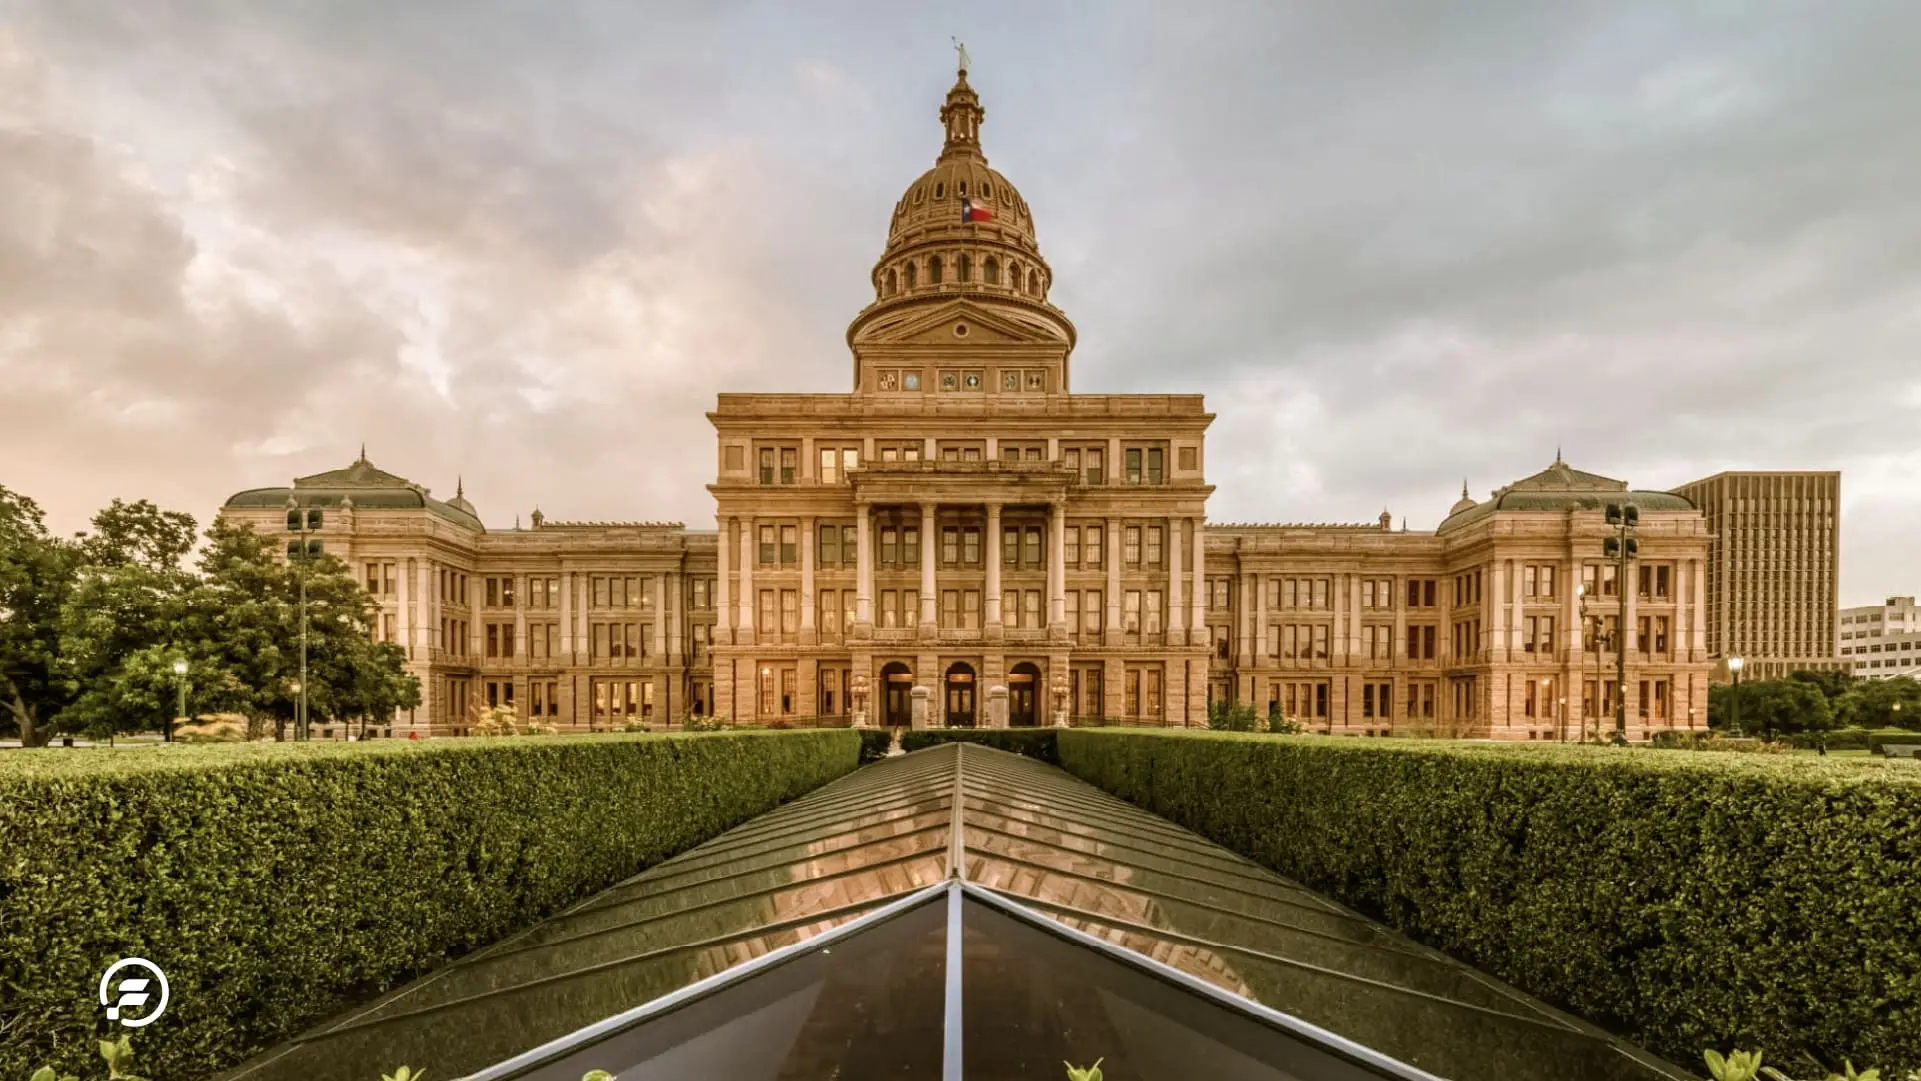 The capitol building of Texas with beautiful symmetry and architecture.